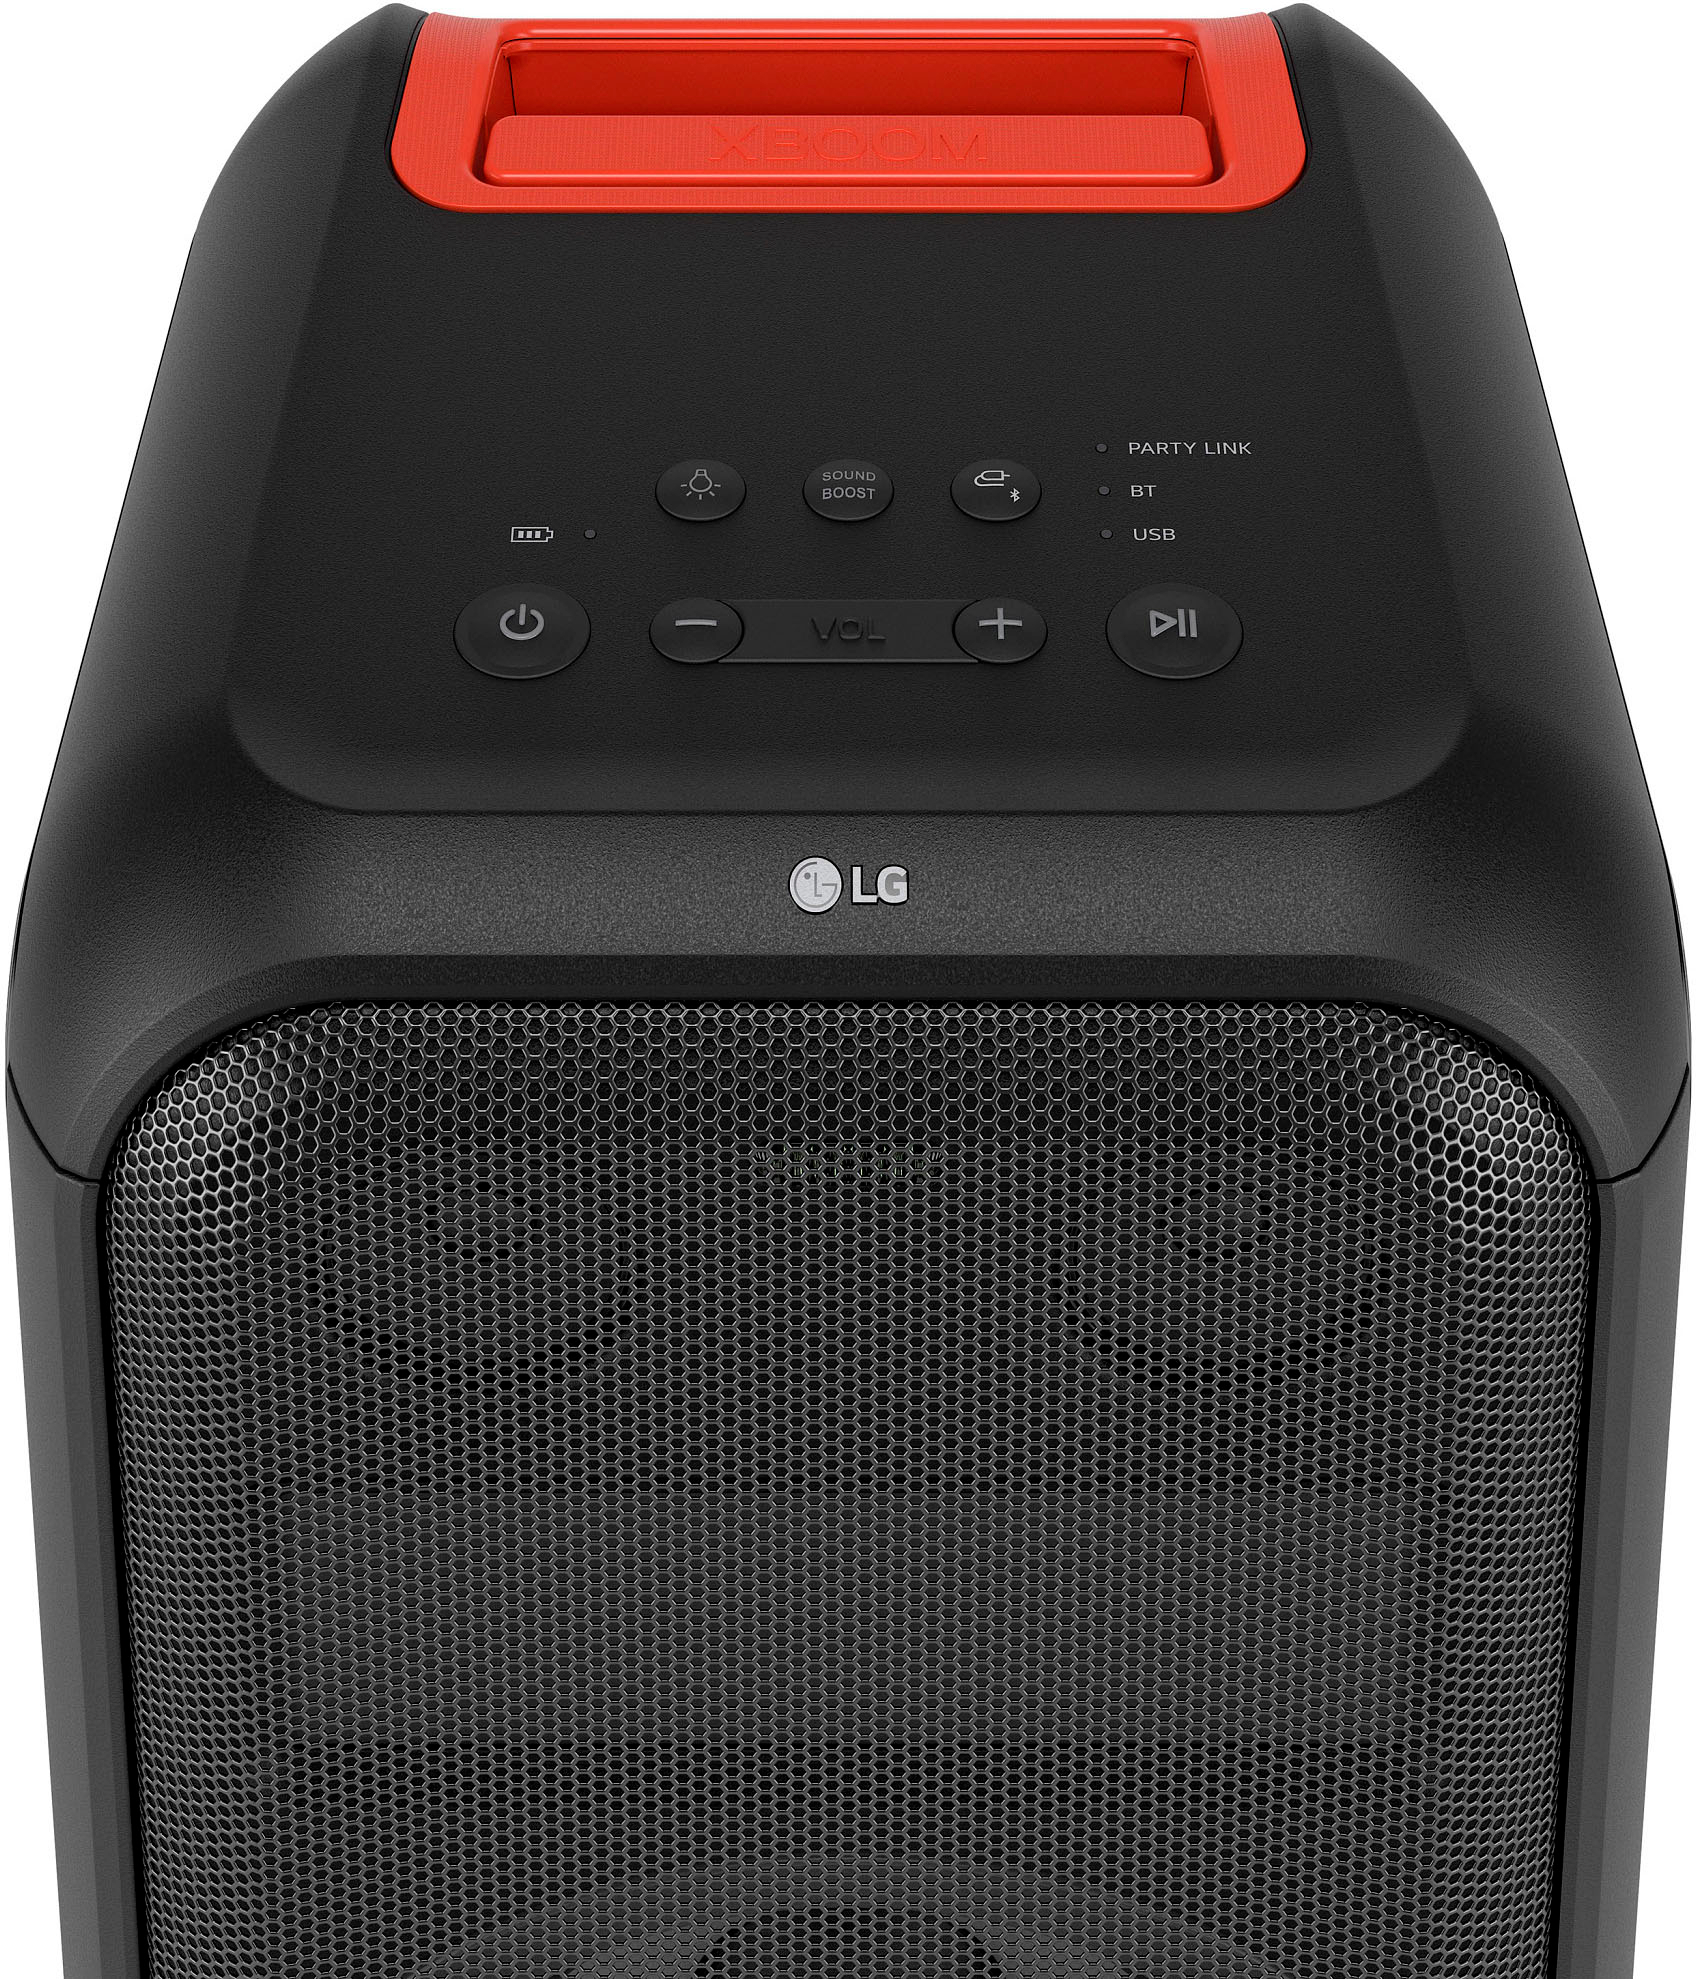 XL7S Buy with Tower - XL7 XBOOM Speaker Pixel Black Portable Best Party LED LG